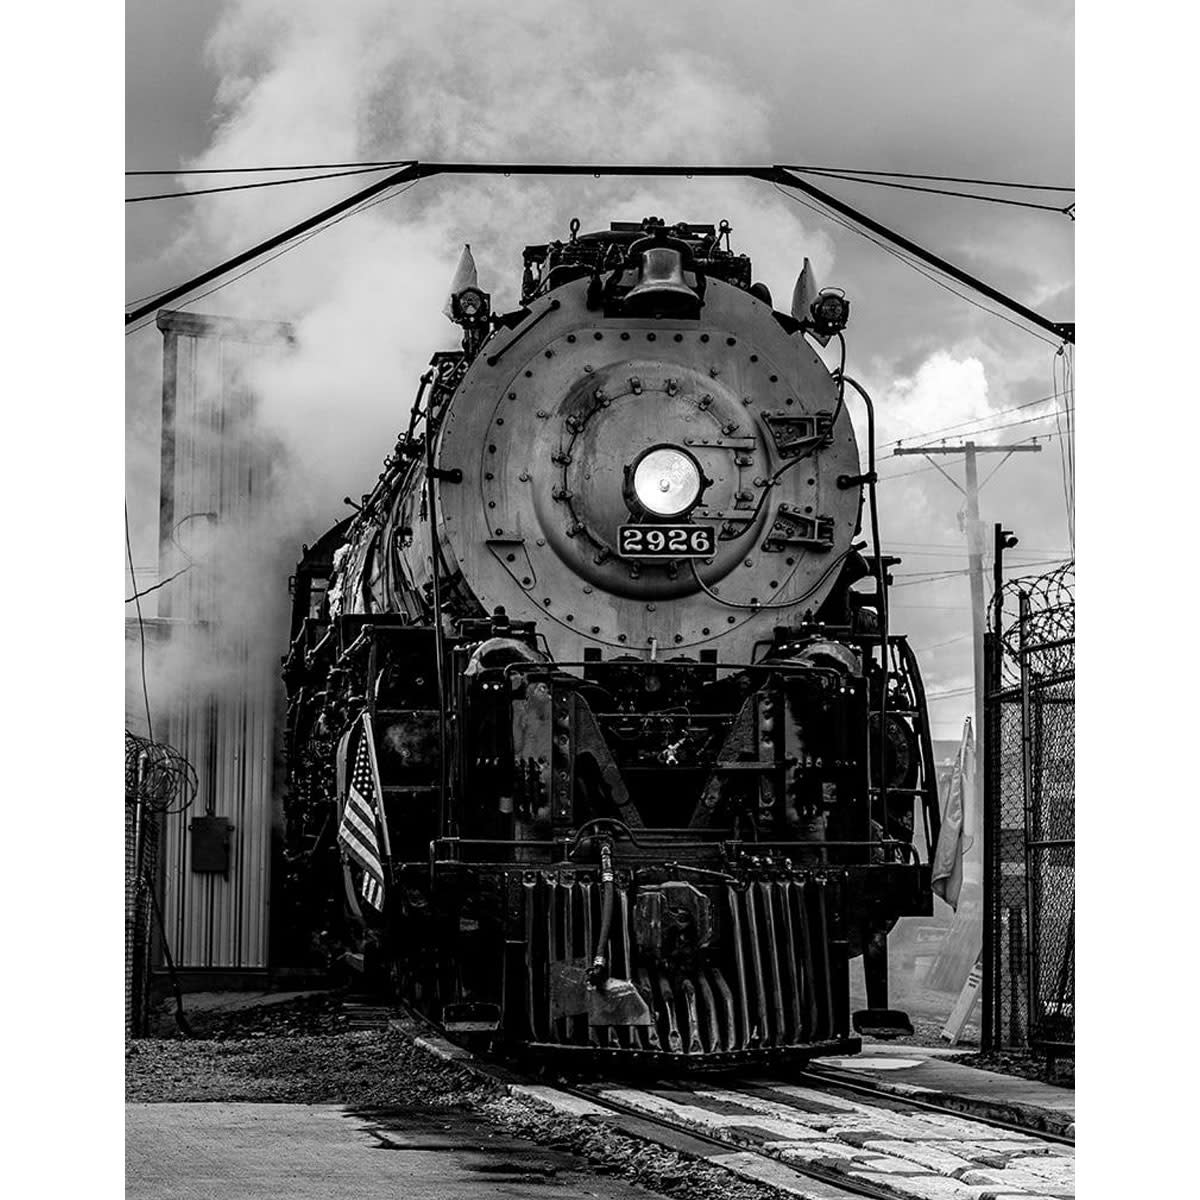 New Mexico Steam Locomotive and Railroad Historical Society - All